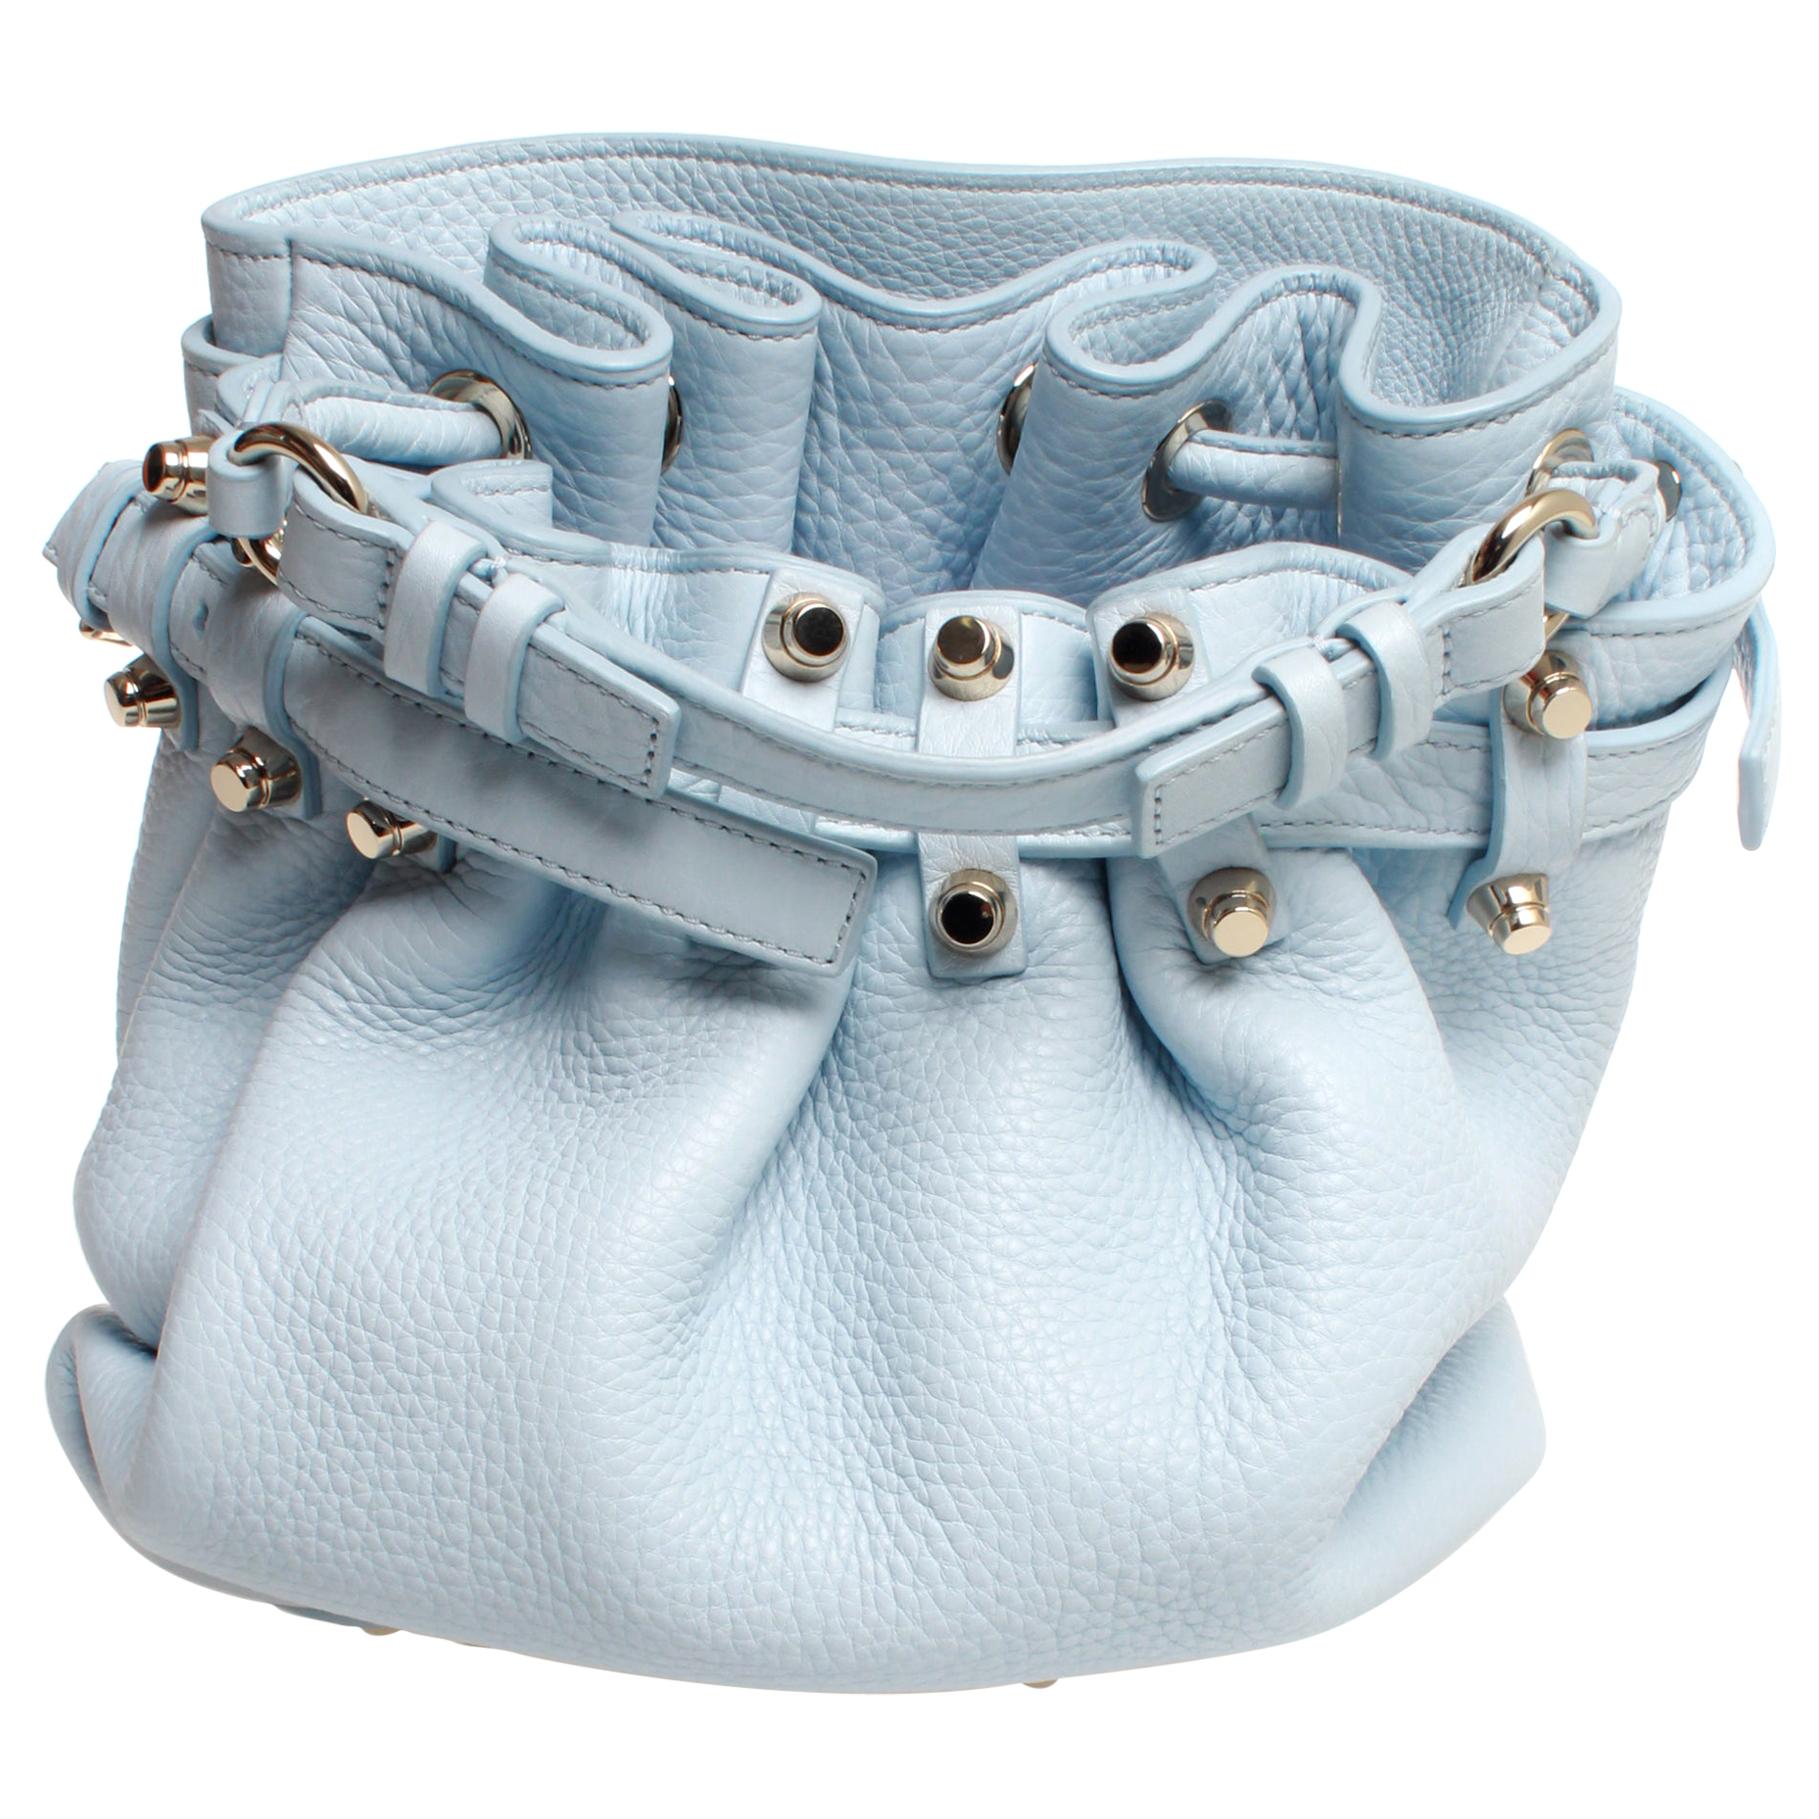 Alexander Wang Diego Bucket Bag For Sale at 1stDibs | alexander wang bucket  bag, alexander wang diego bucket bag sale, alexander wang diego sale